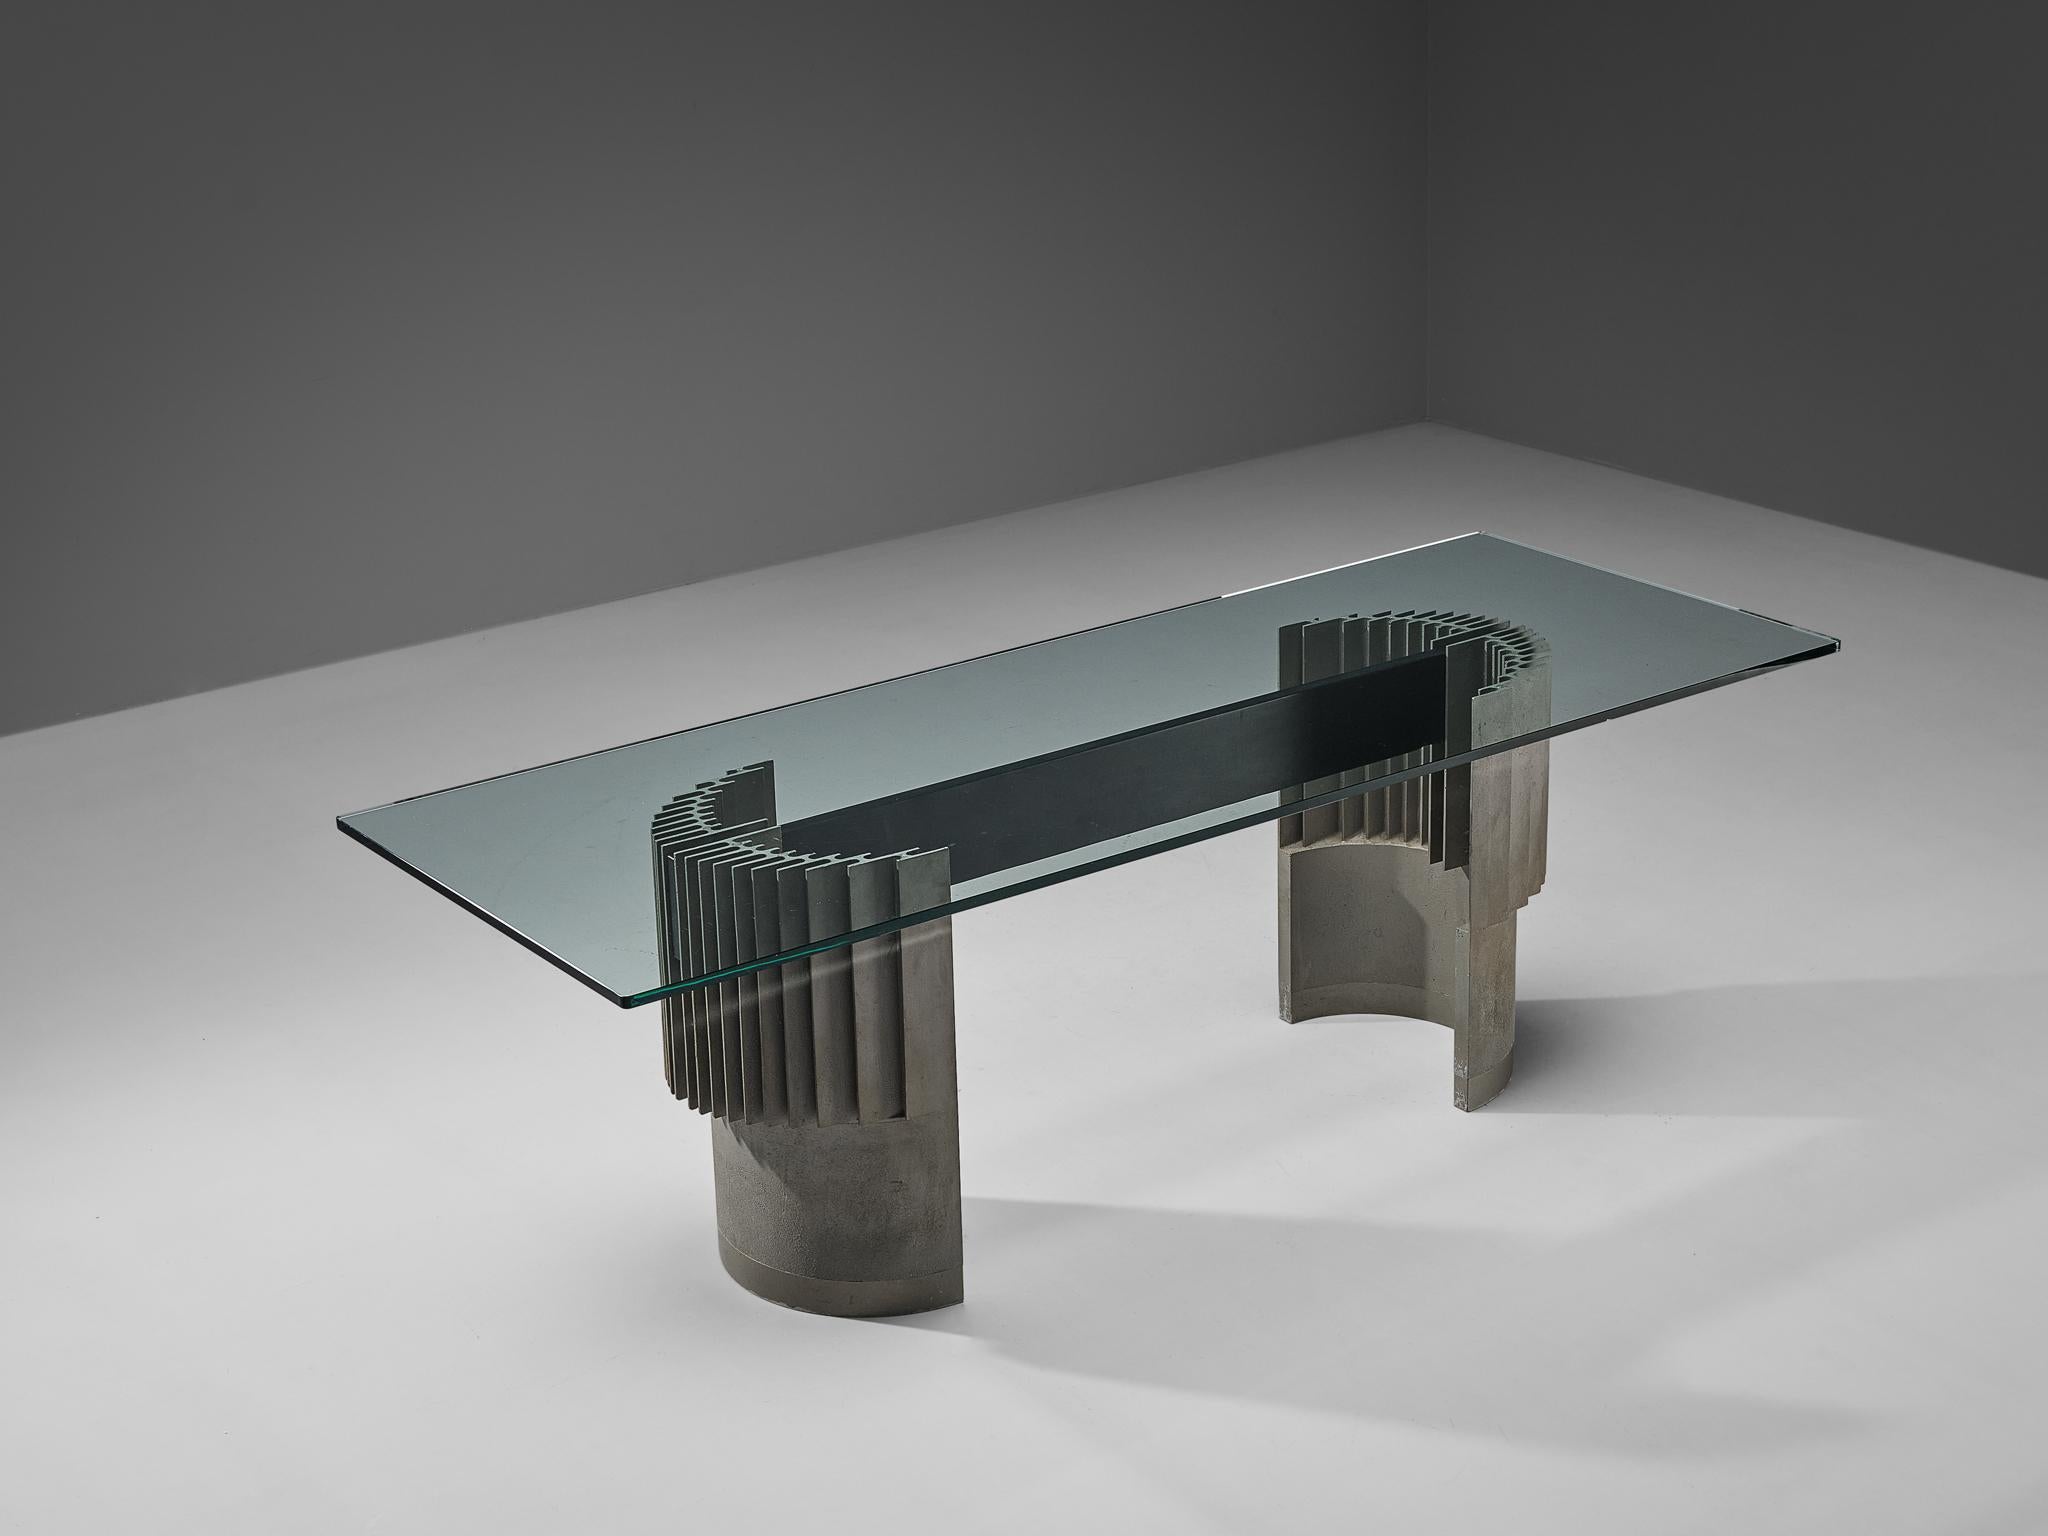 Giovanni Offredi for Saporiti, dining table, cast aluminum, glass, wood, Italy, 1970s

This sculptural dining table is designed by Giovanni Offredi for Saporiti in the seventies. The meticulously crafted base features two concave-shaped frames made